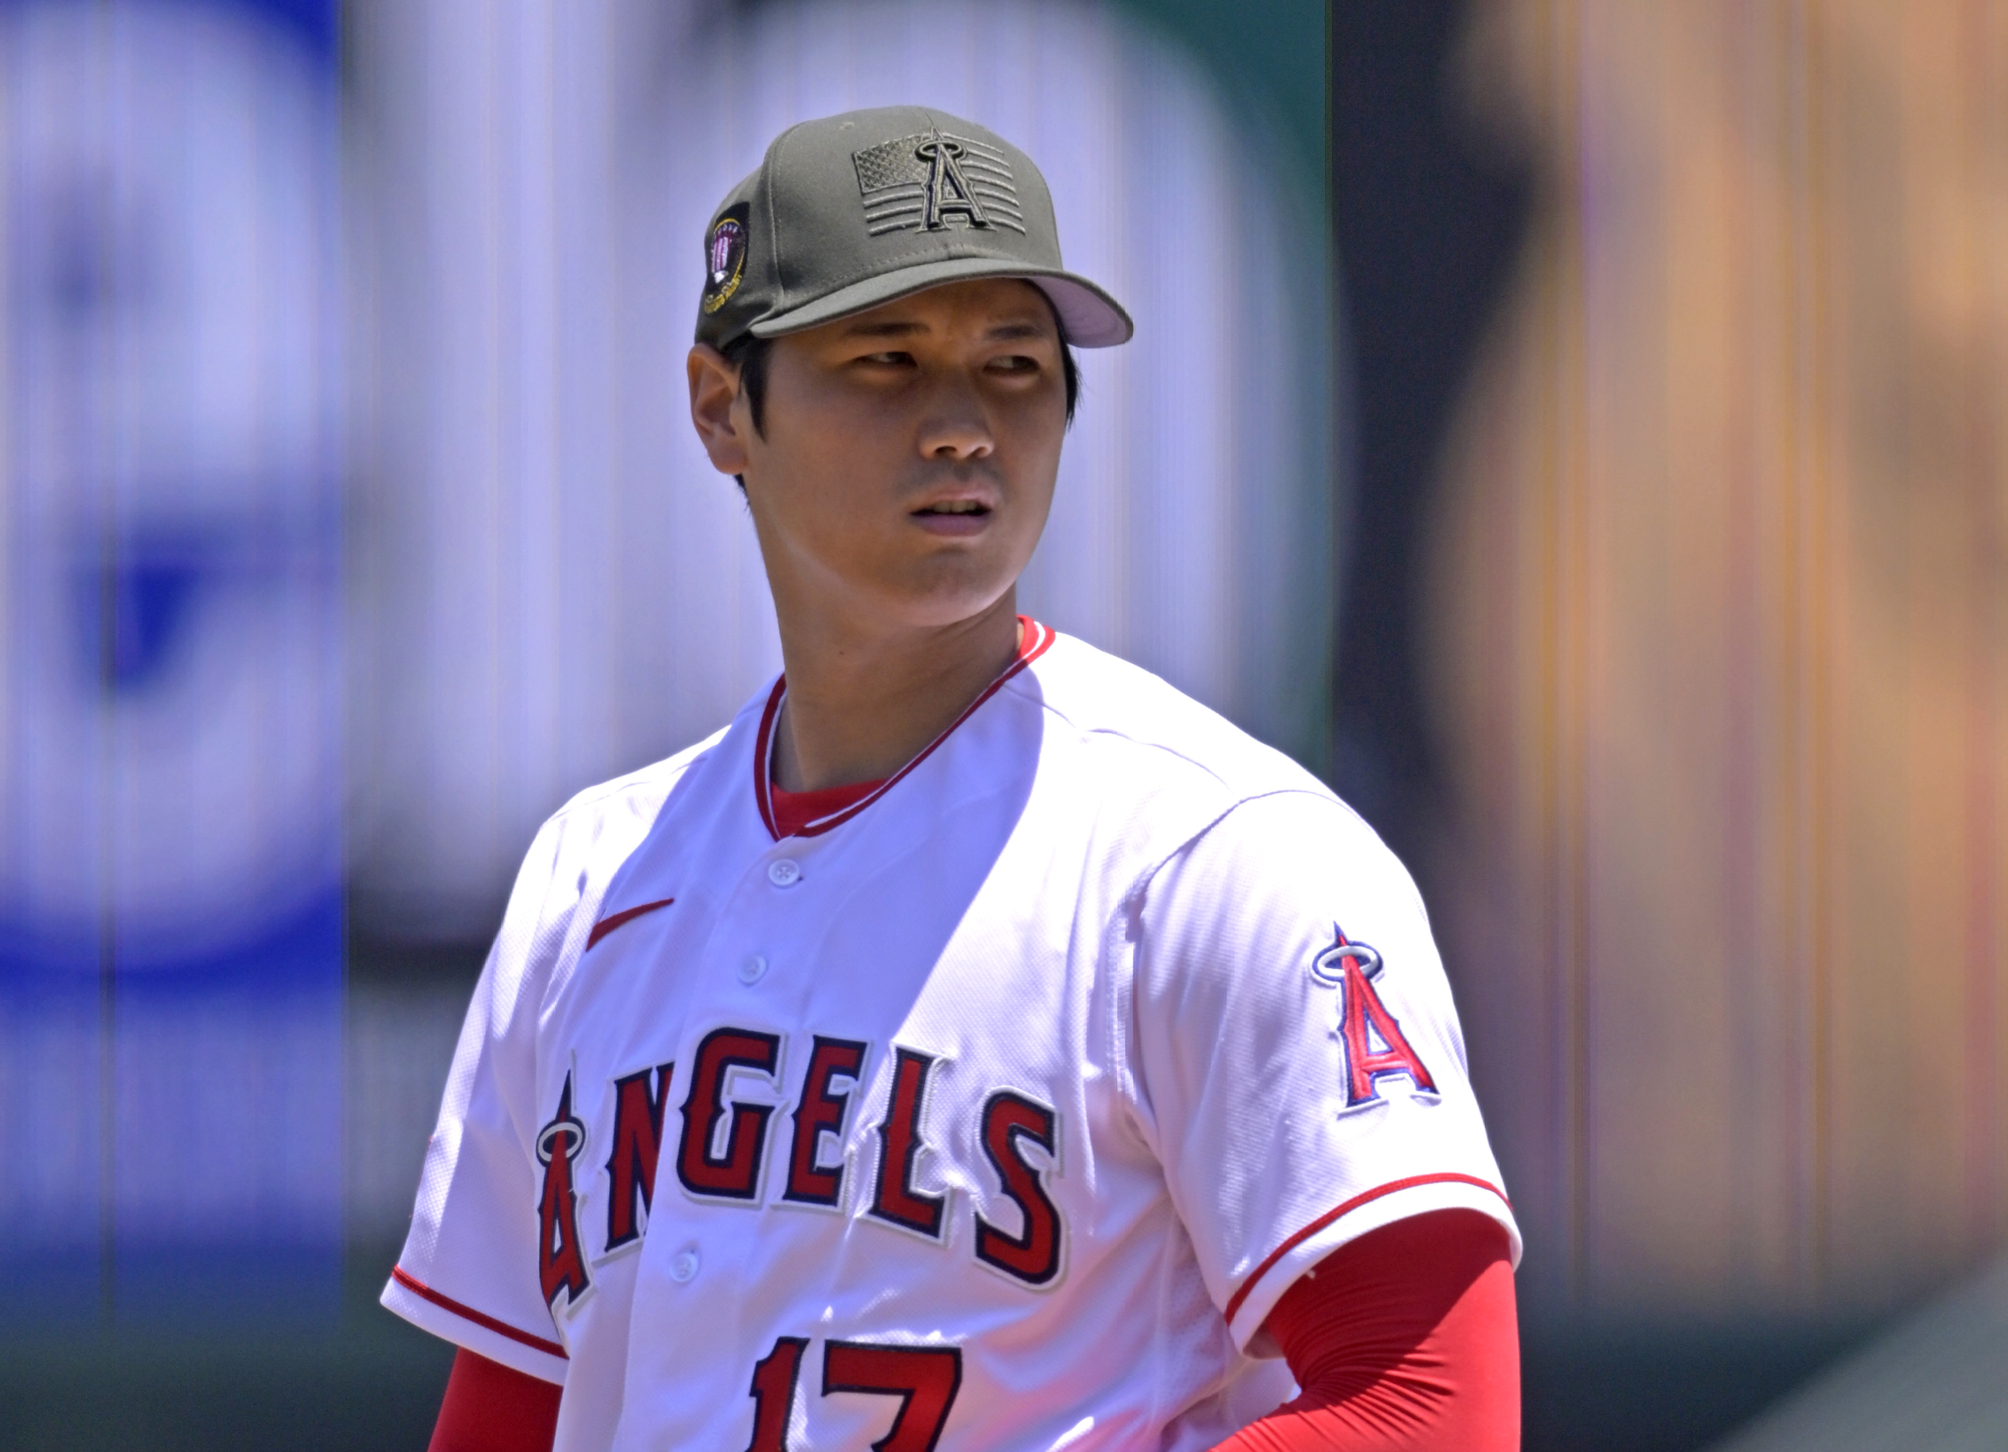 Dodgers may be early favorite in Shohei Ohtani sweepstakes